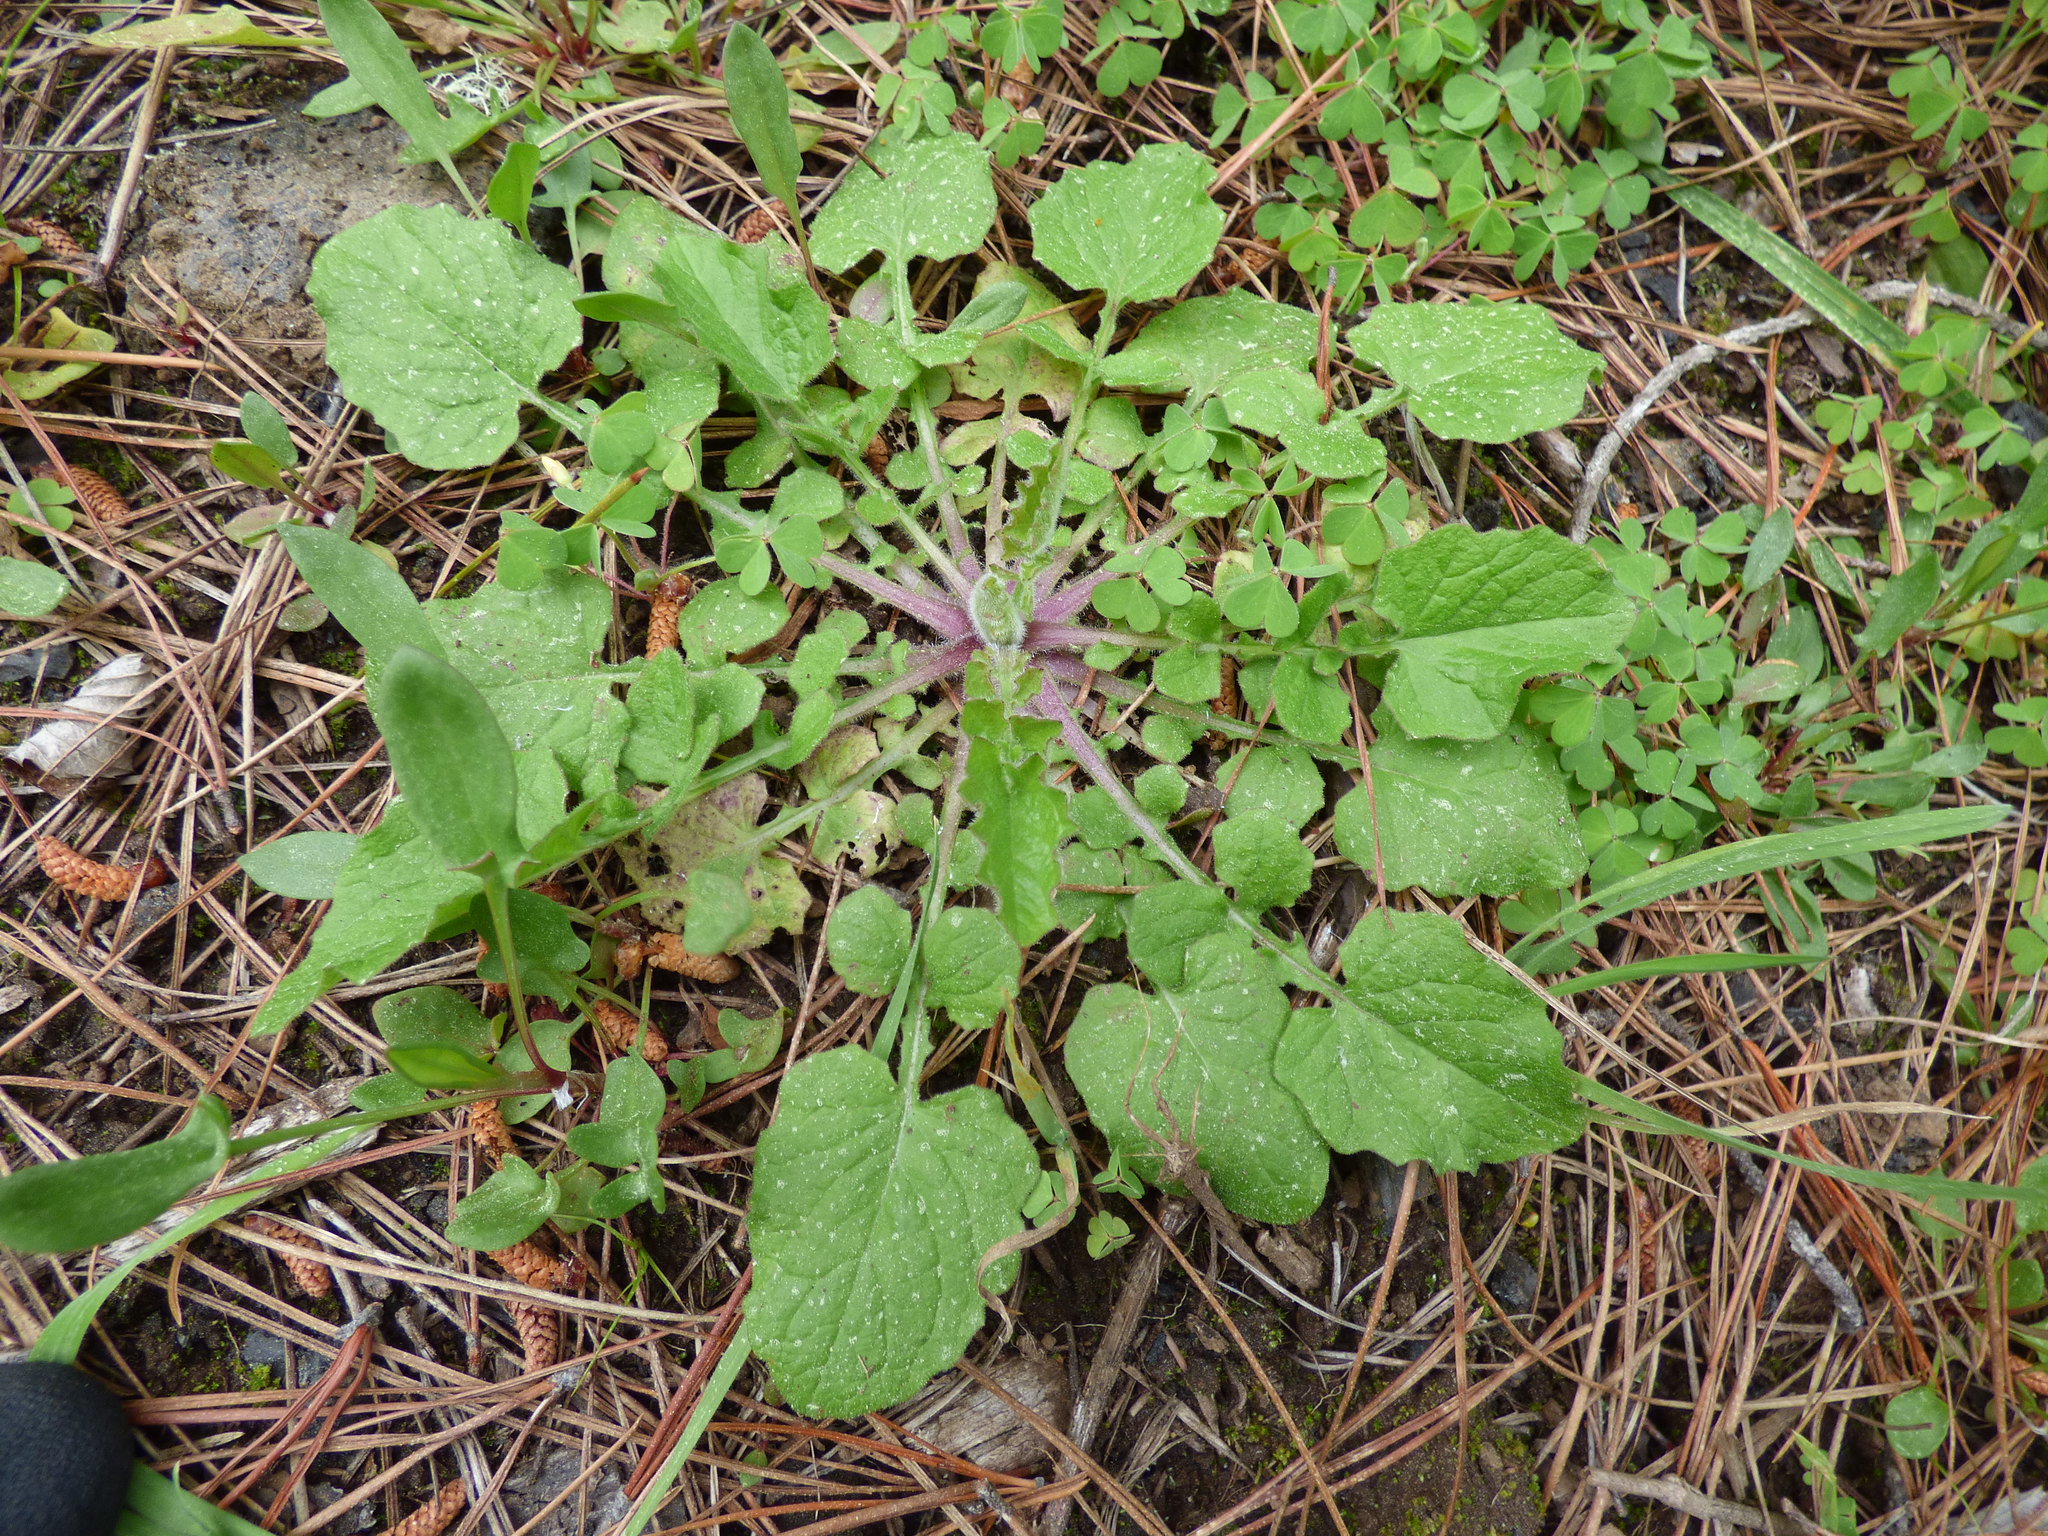 youngia japonica_rosette_Photo by Forest and Kim Starr_CC BY 2.0 DEED